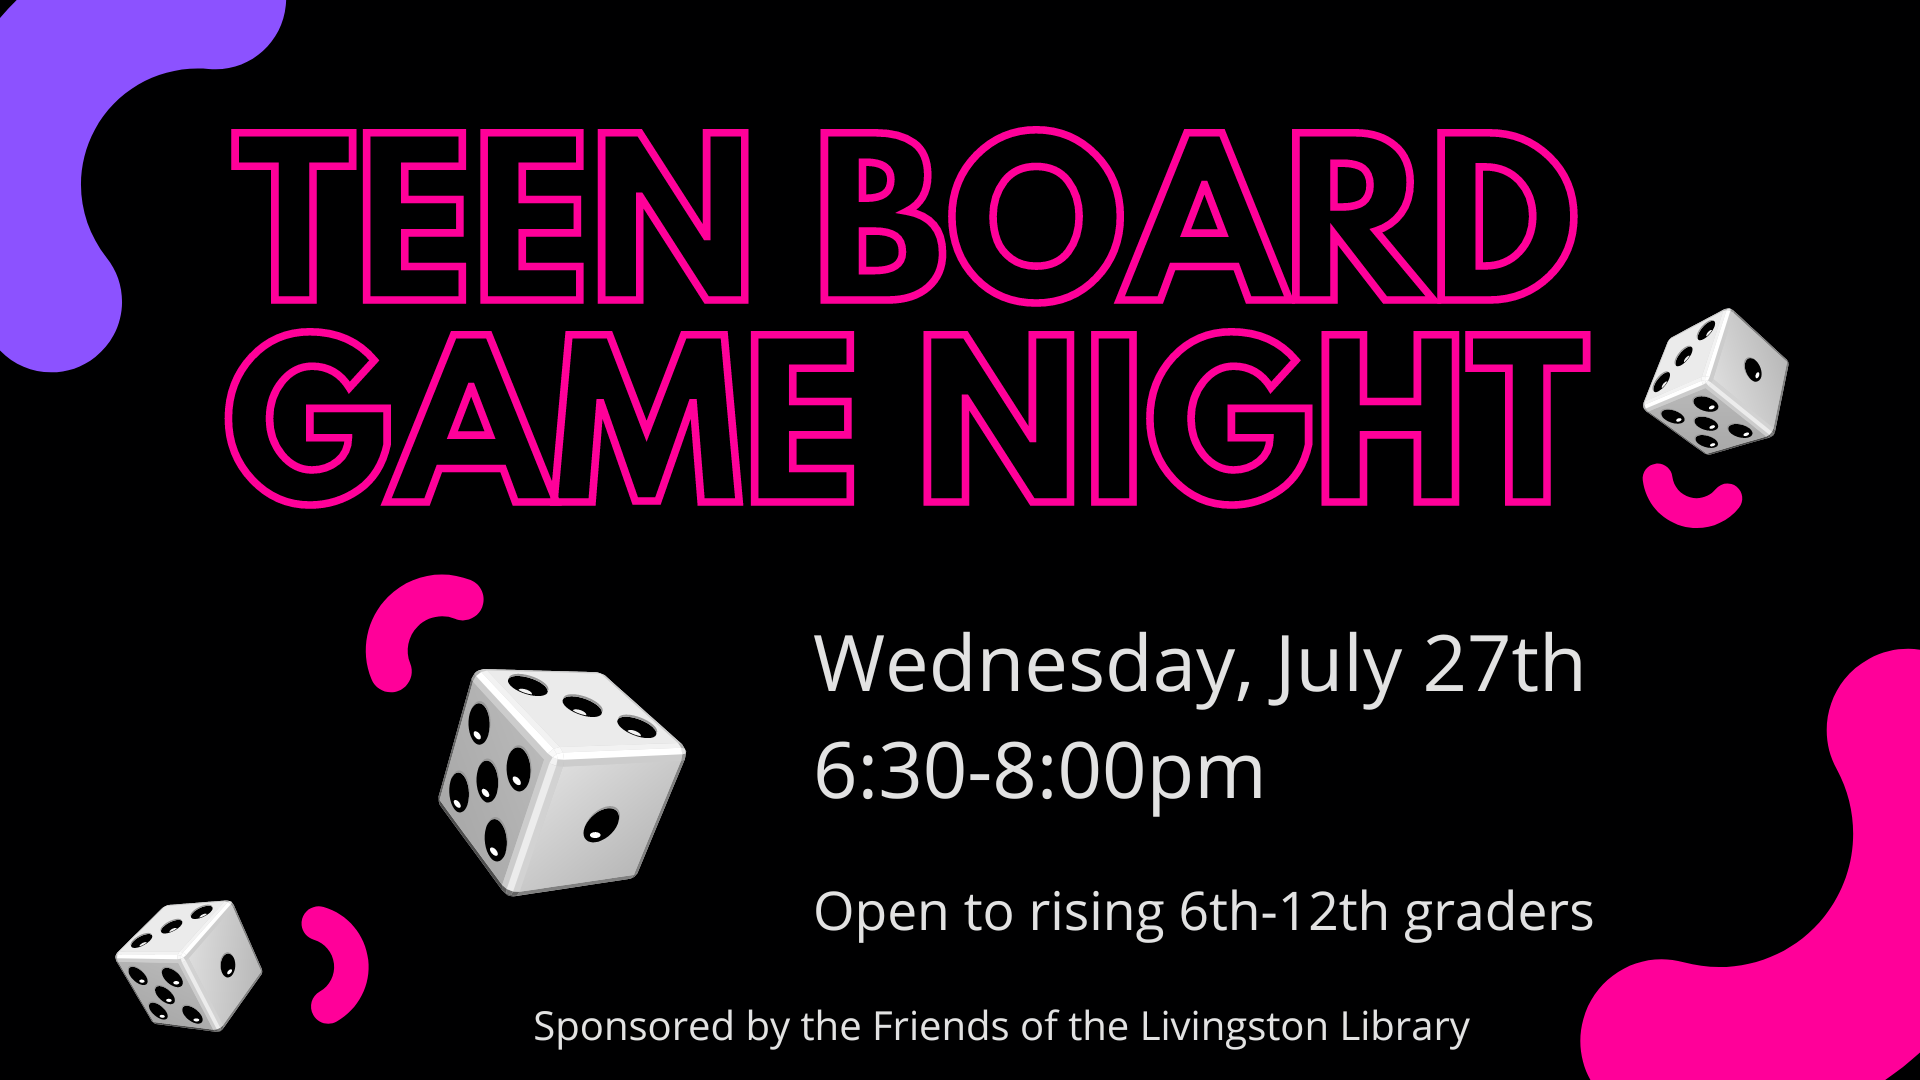 teen board game night in neon pink text on a black background with dice on either side